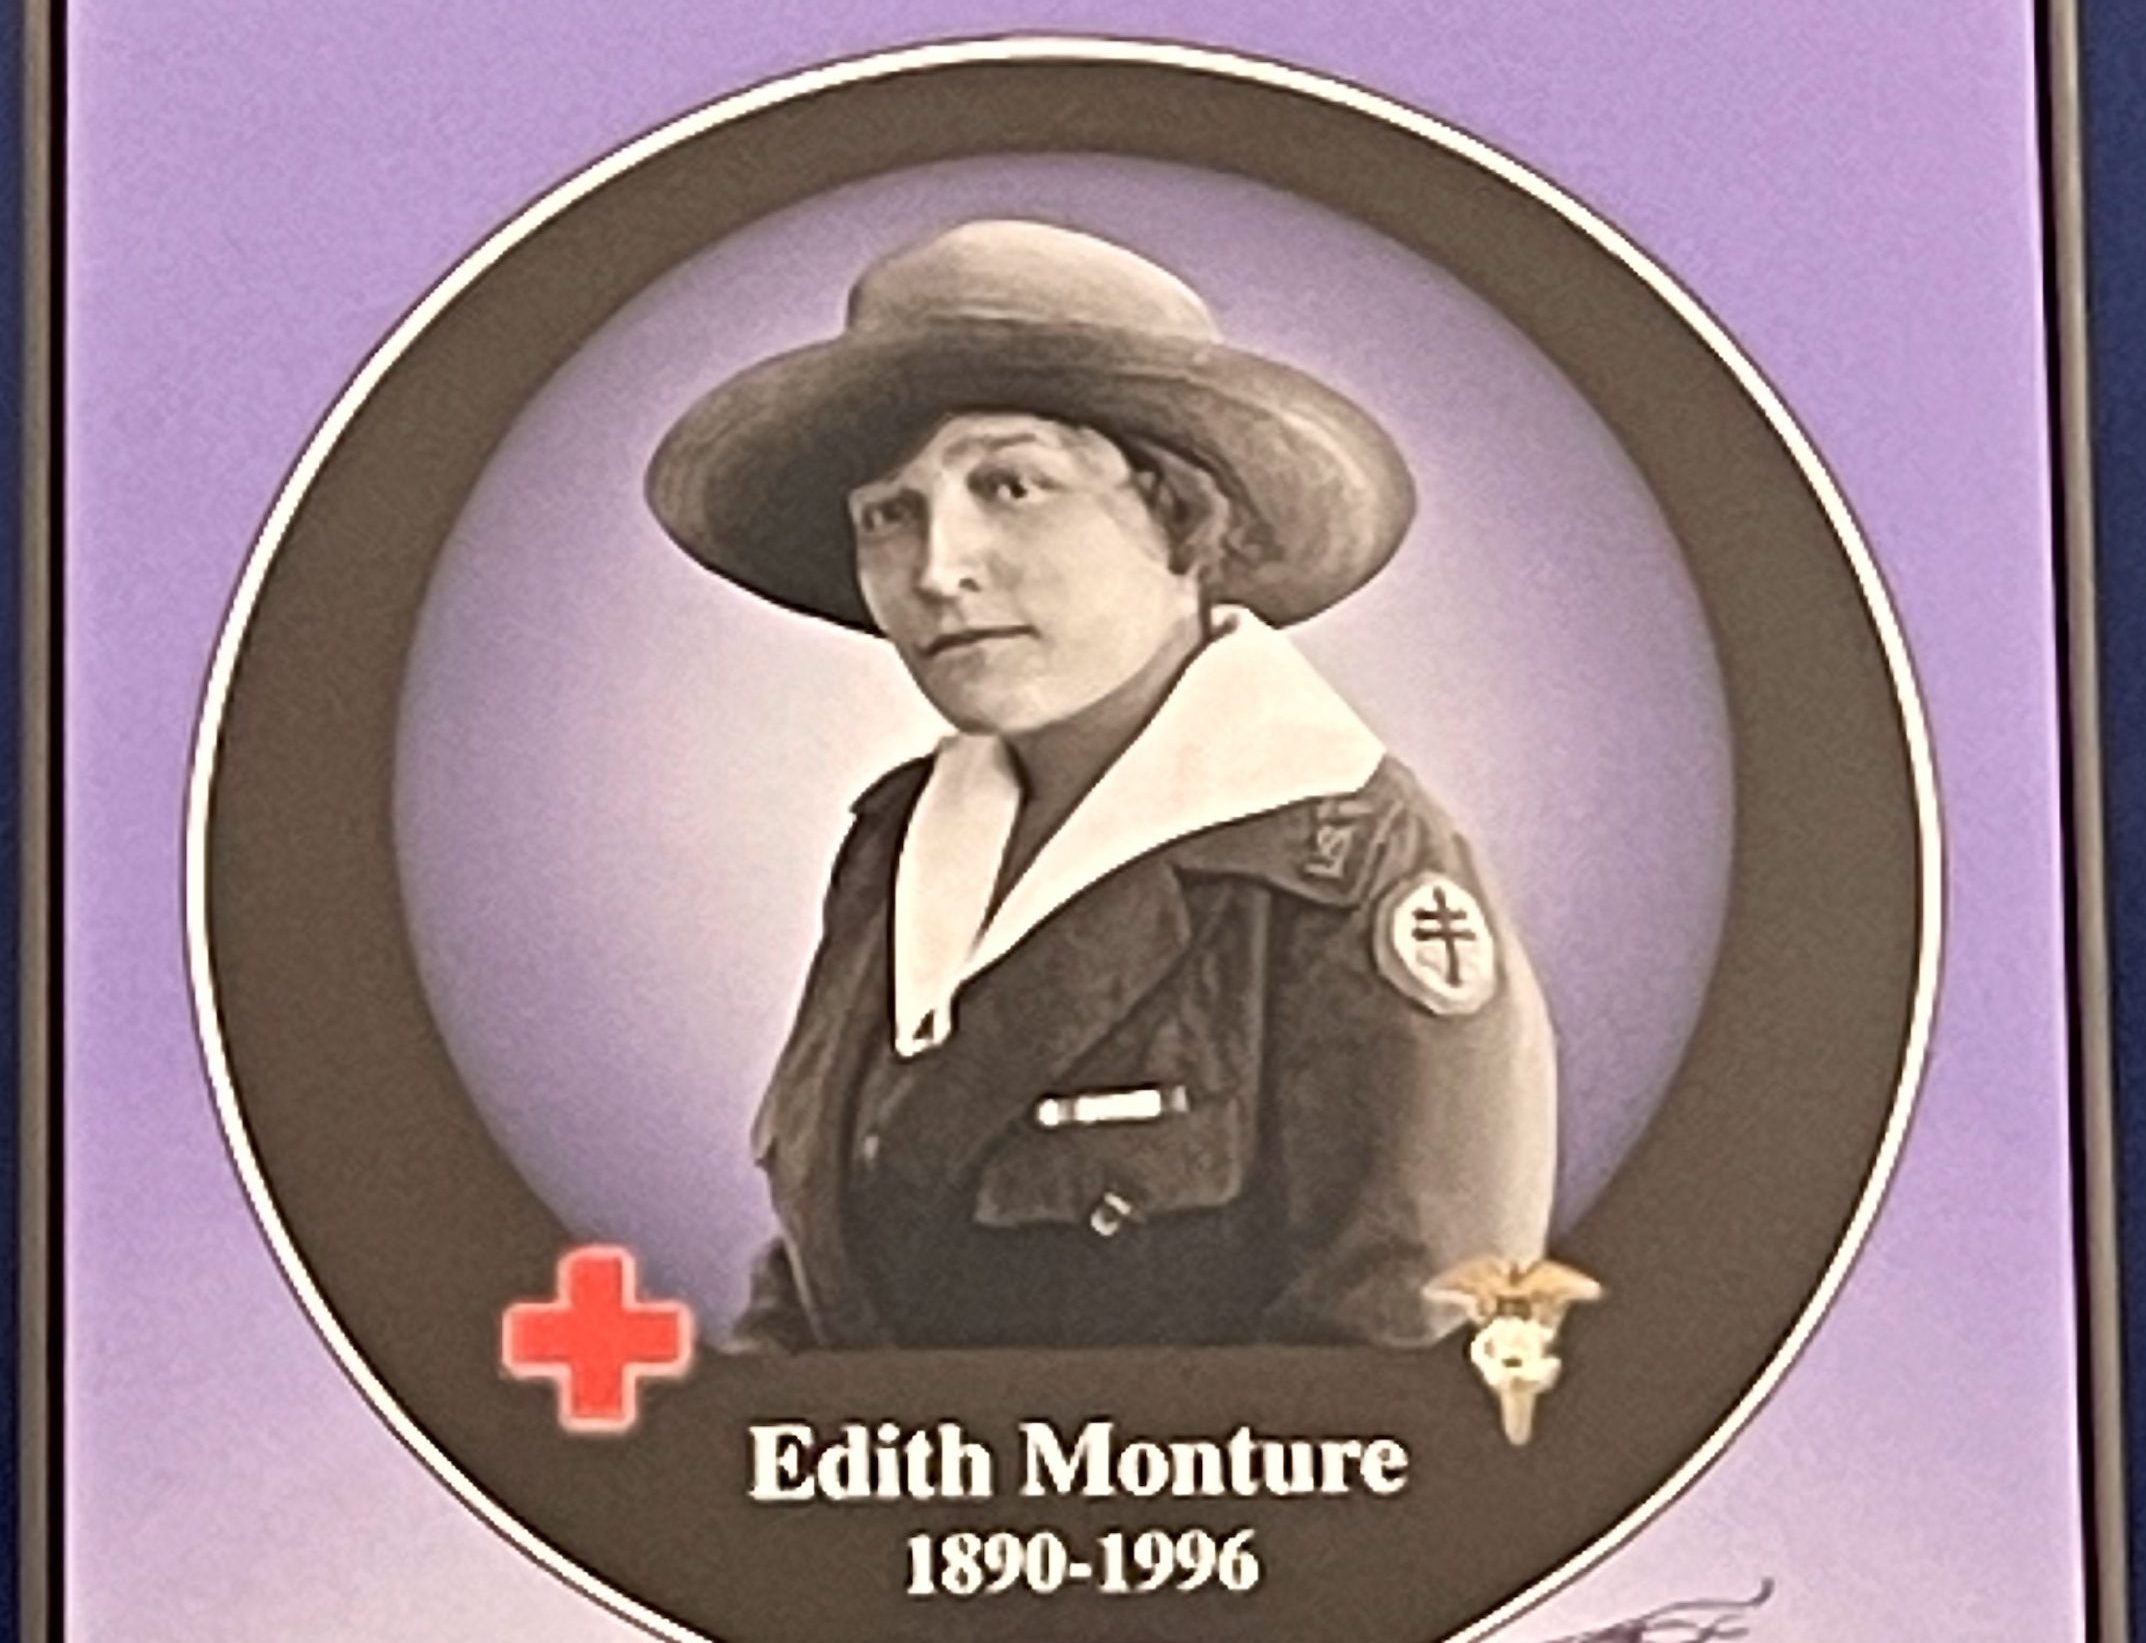 Image of Edith Monture and 1890-1996, with words- Mohawk, bear clan and belt.